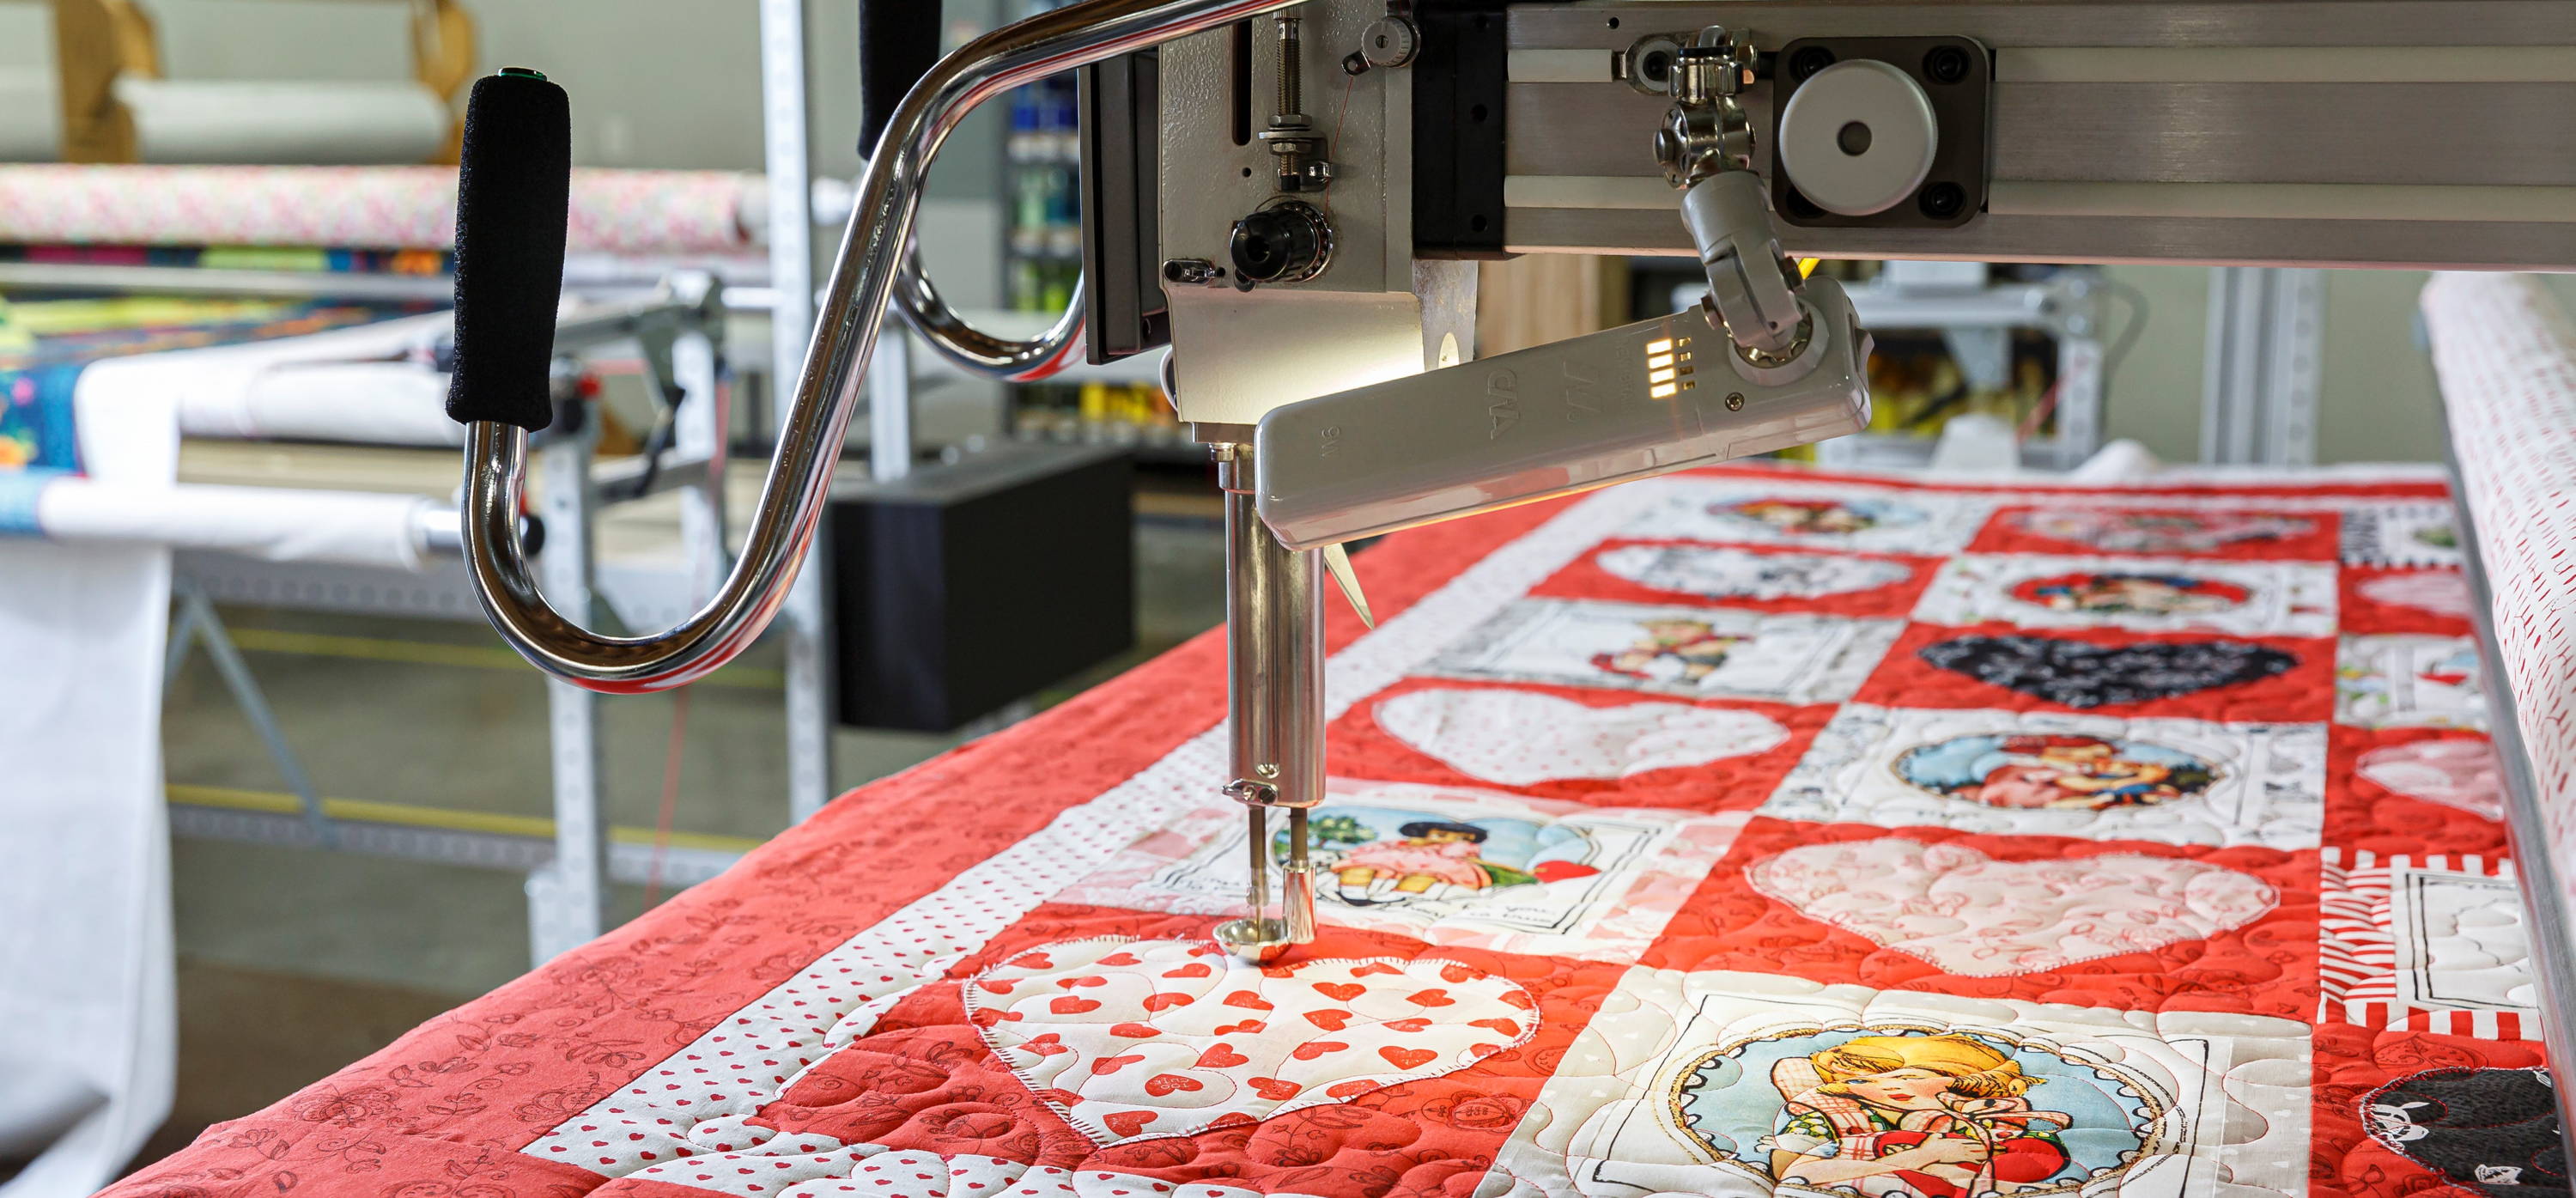 Finish your valentine's day quilt with machine quilting